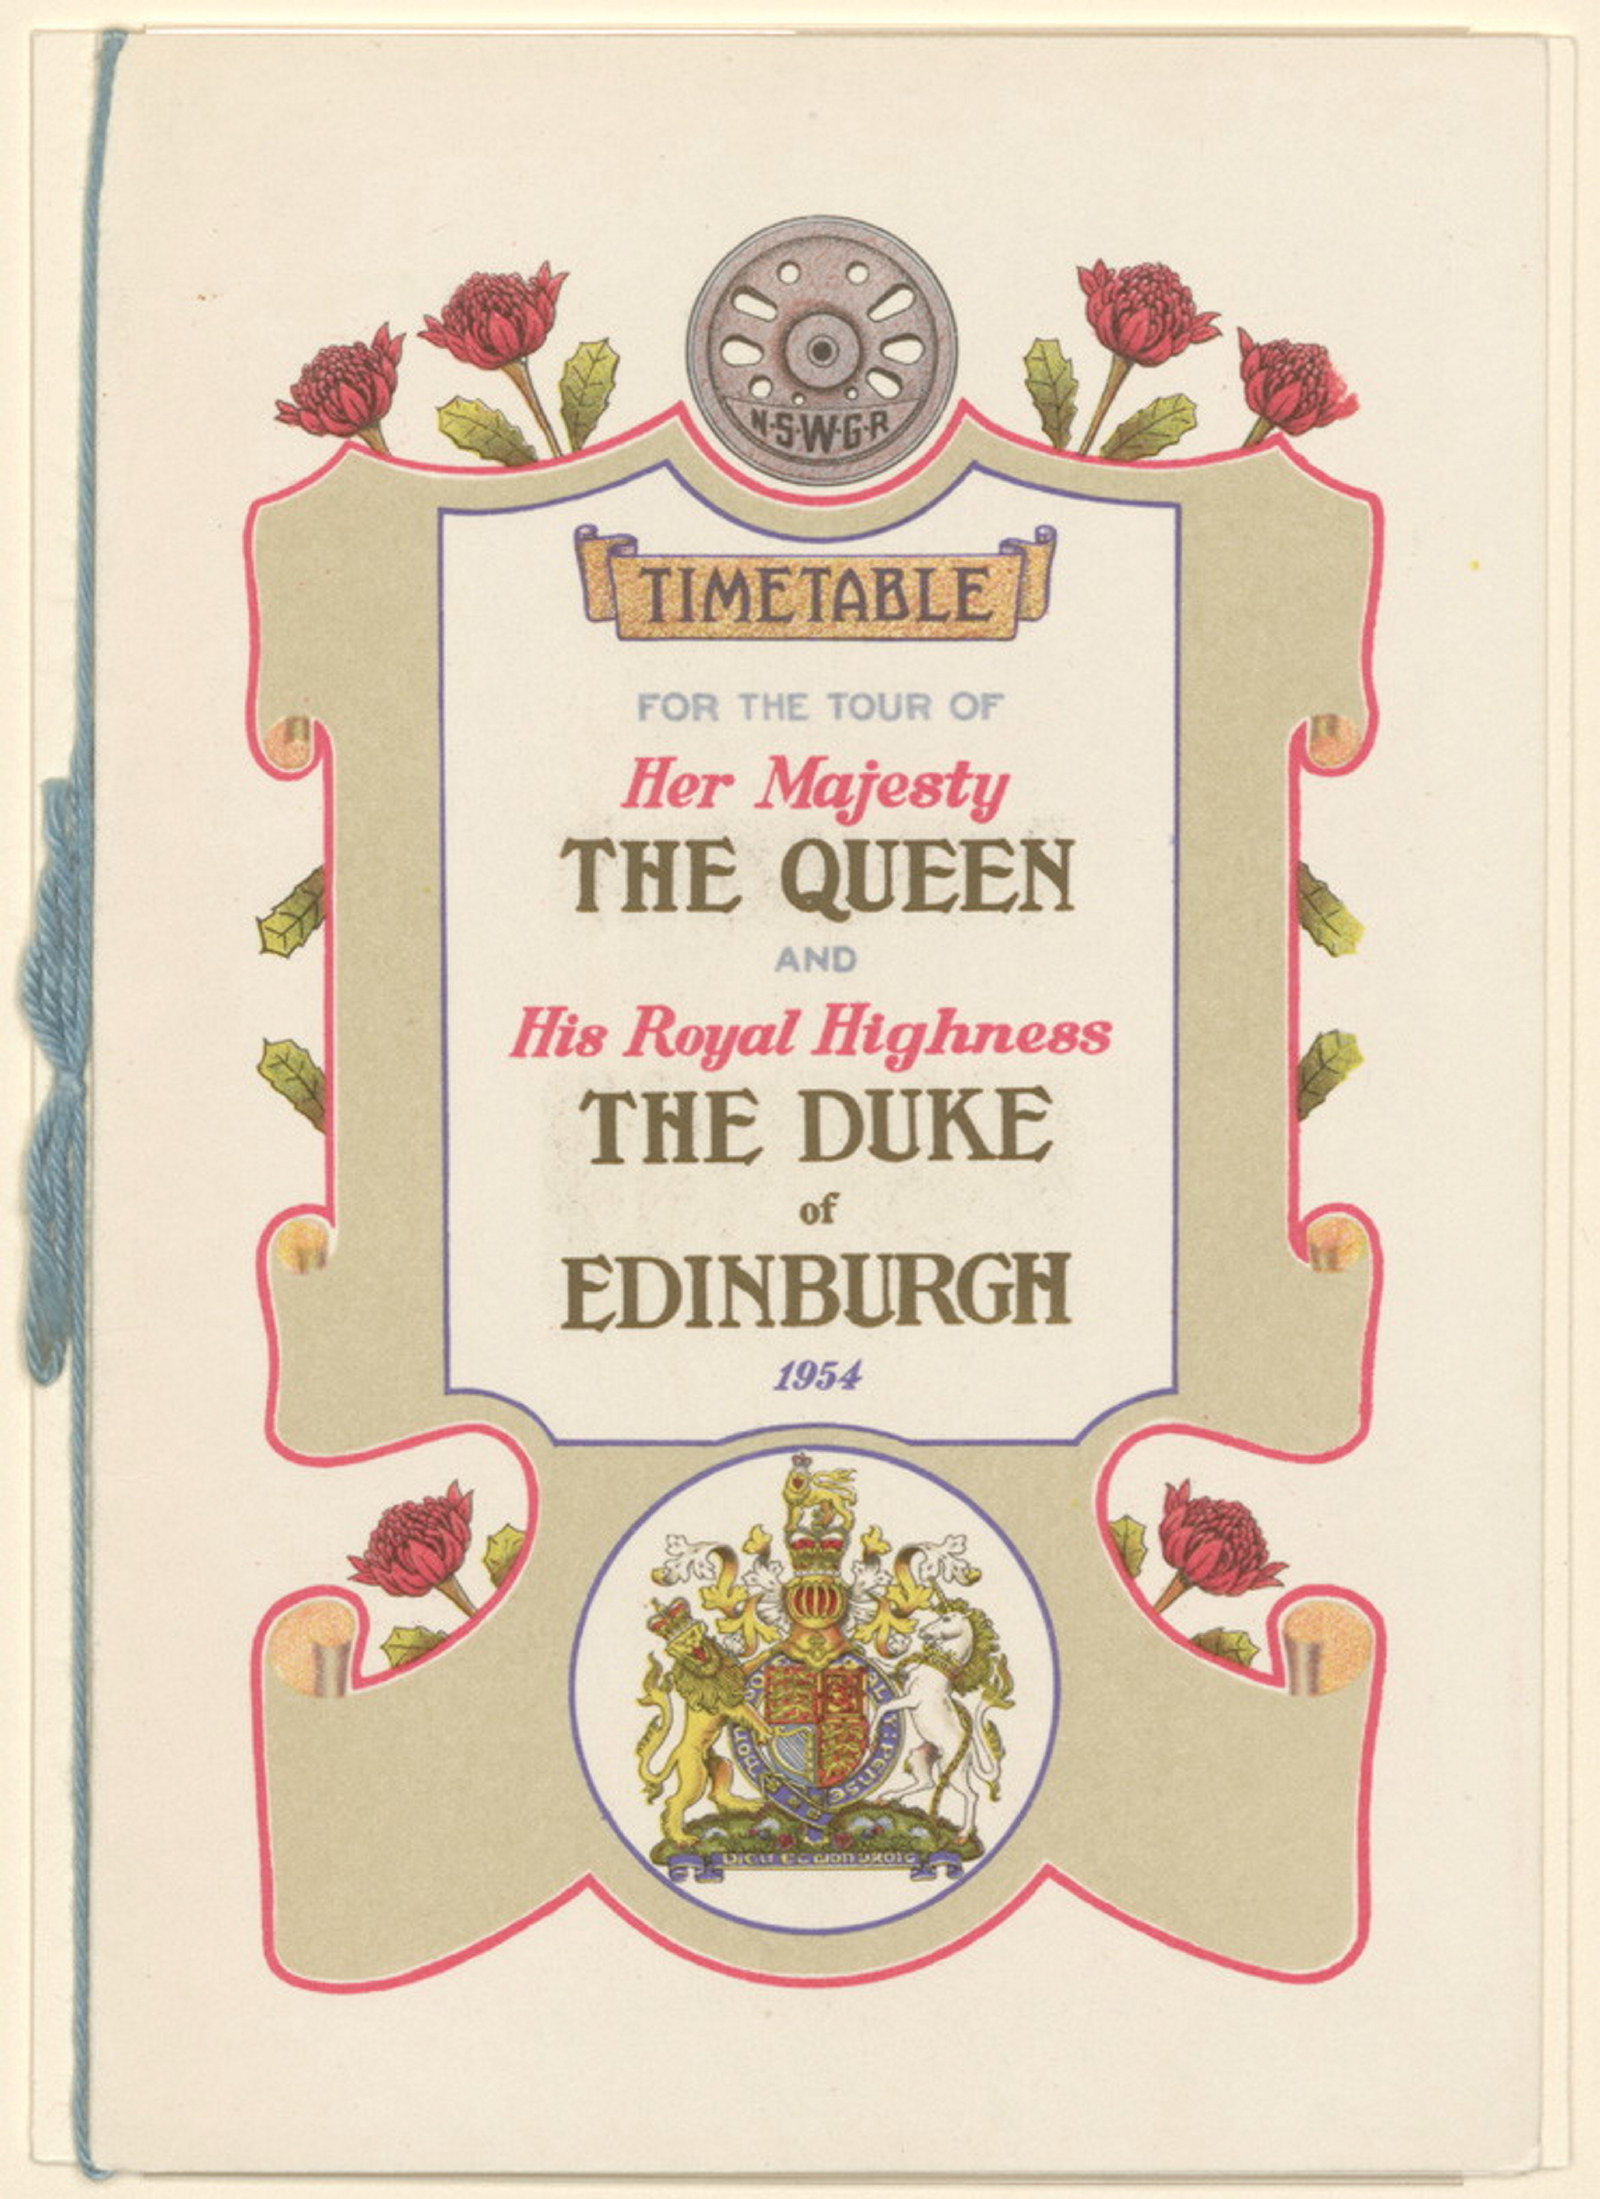 Cover of the timetable for the Royal Train